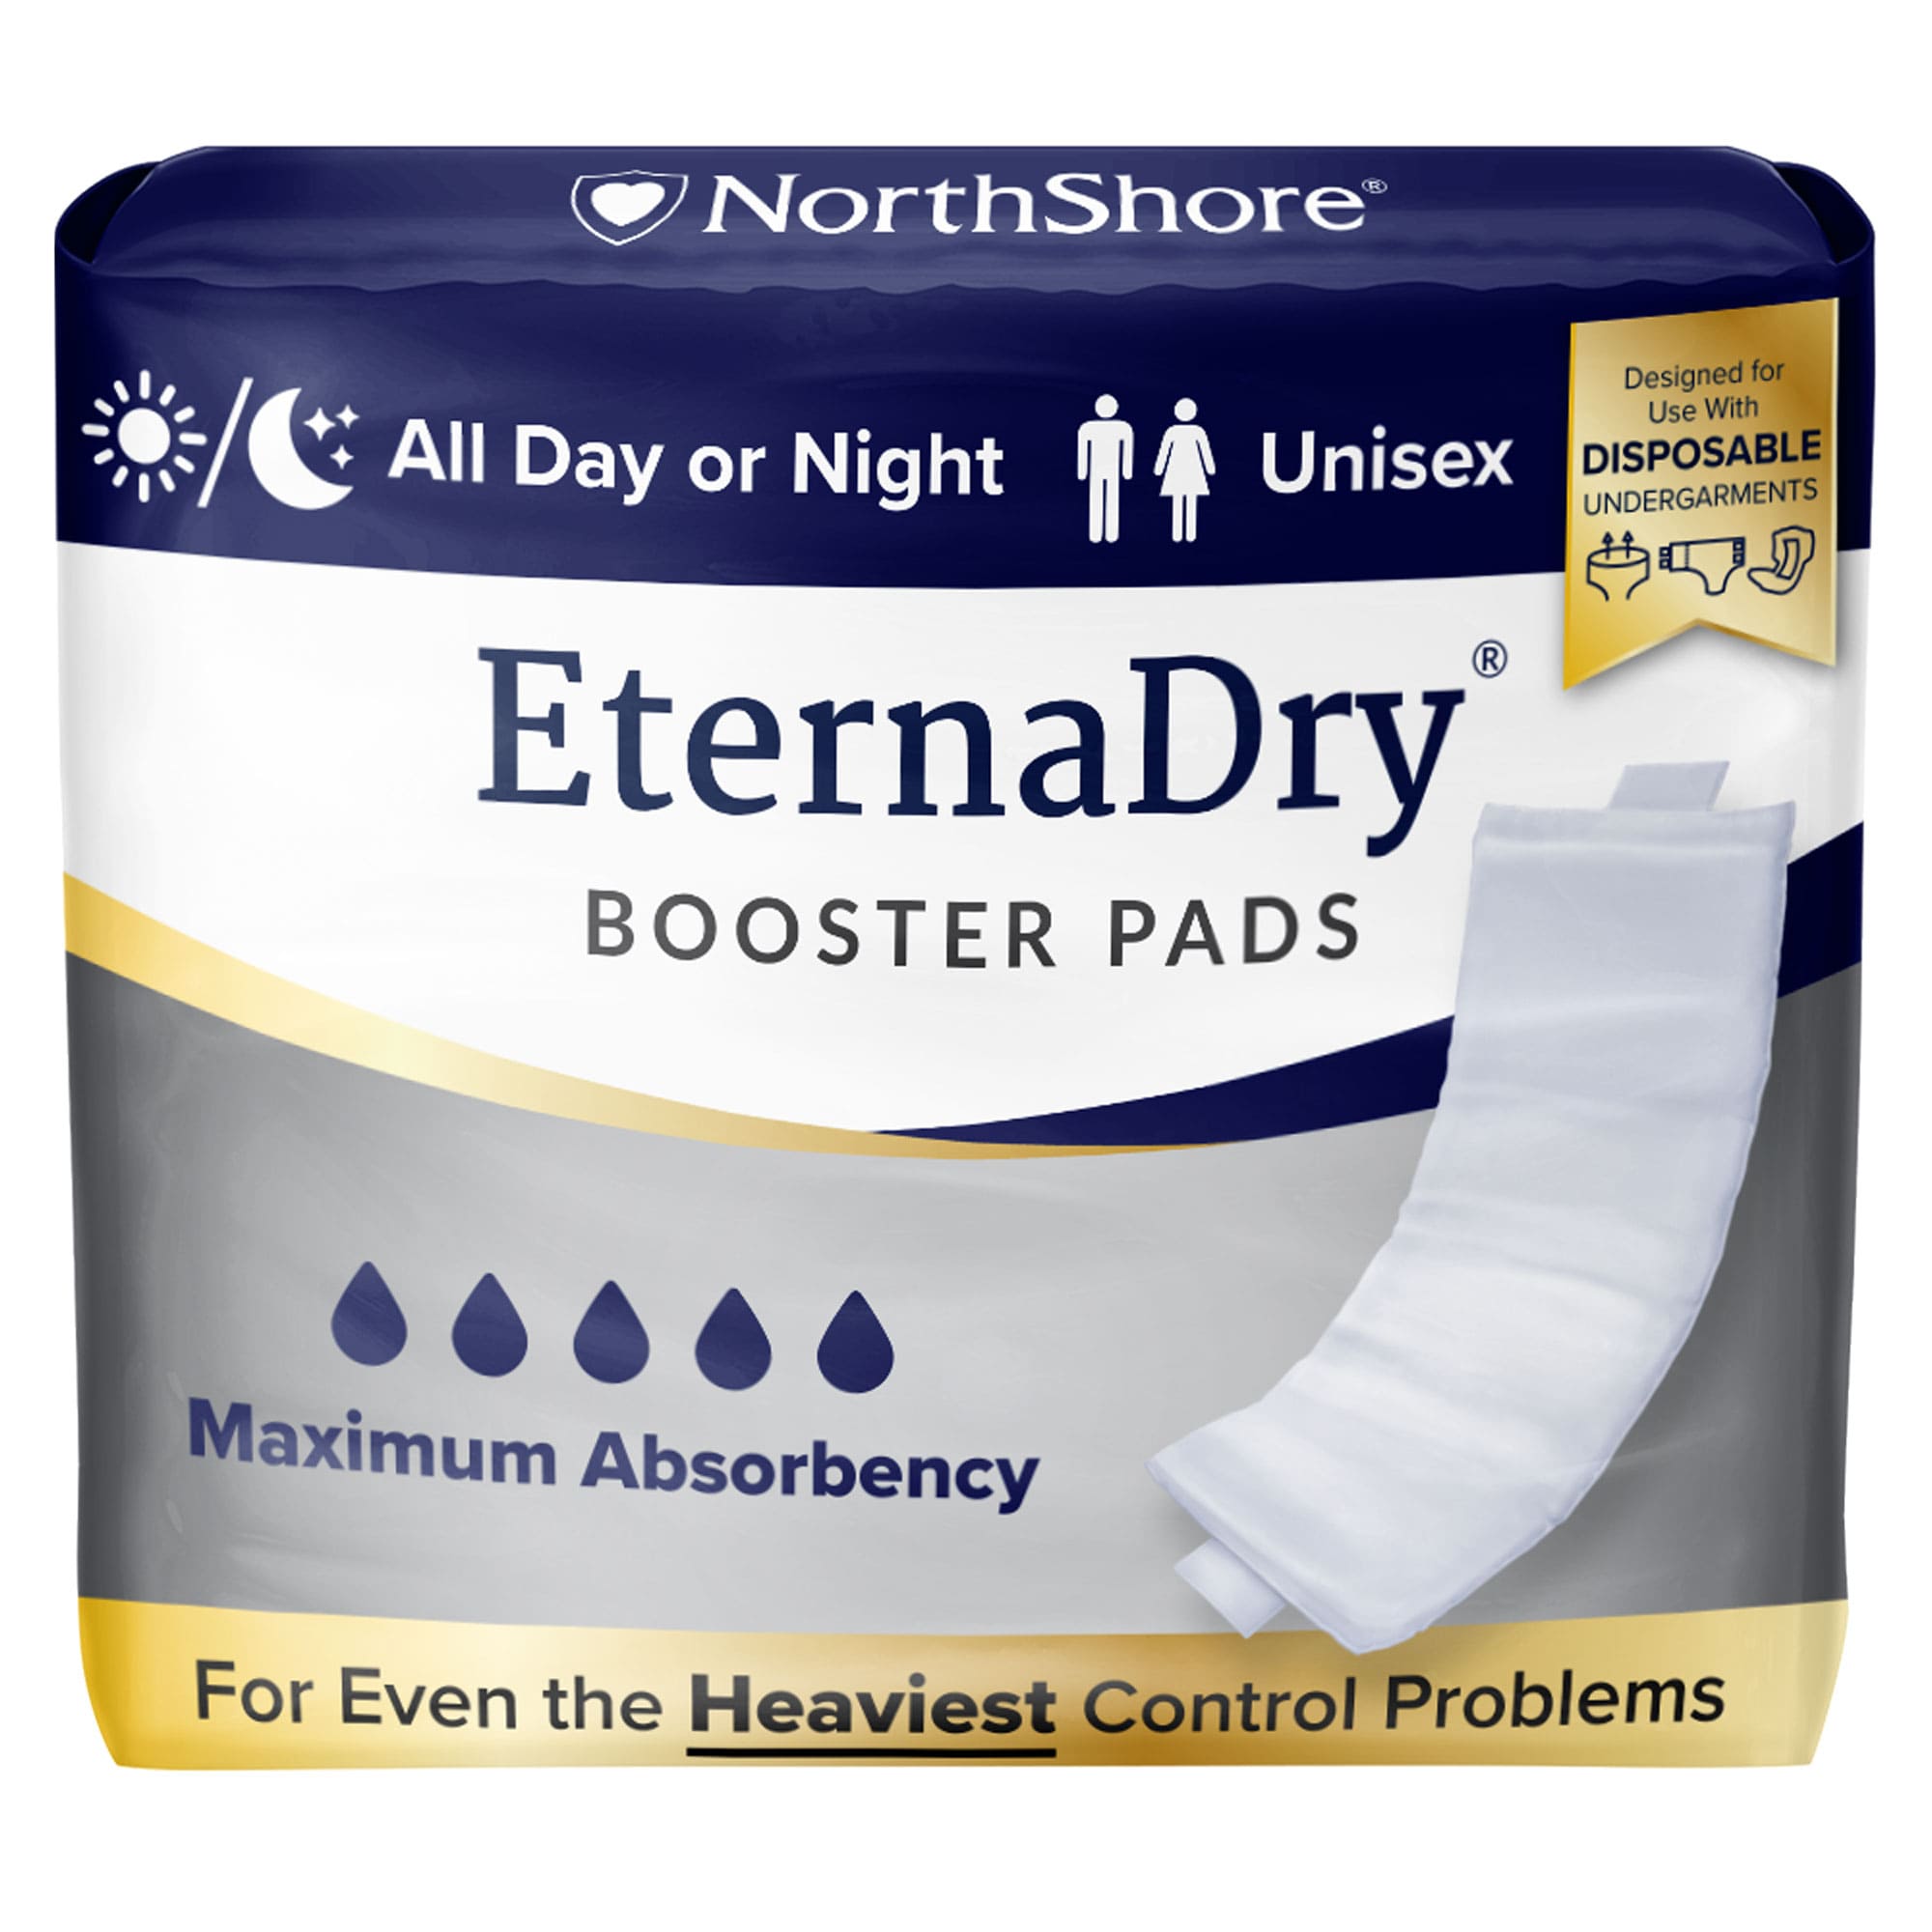 booster pads for containing bowel leaks